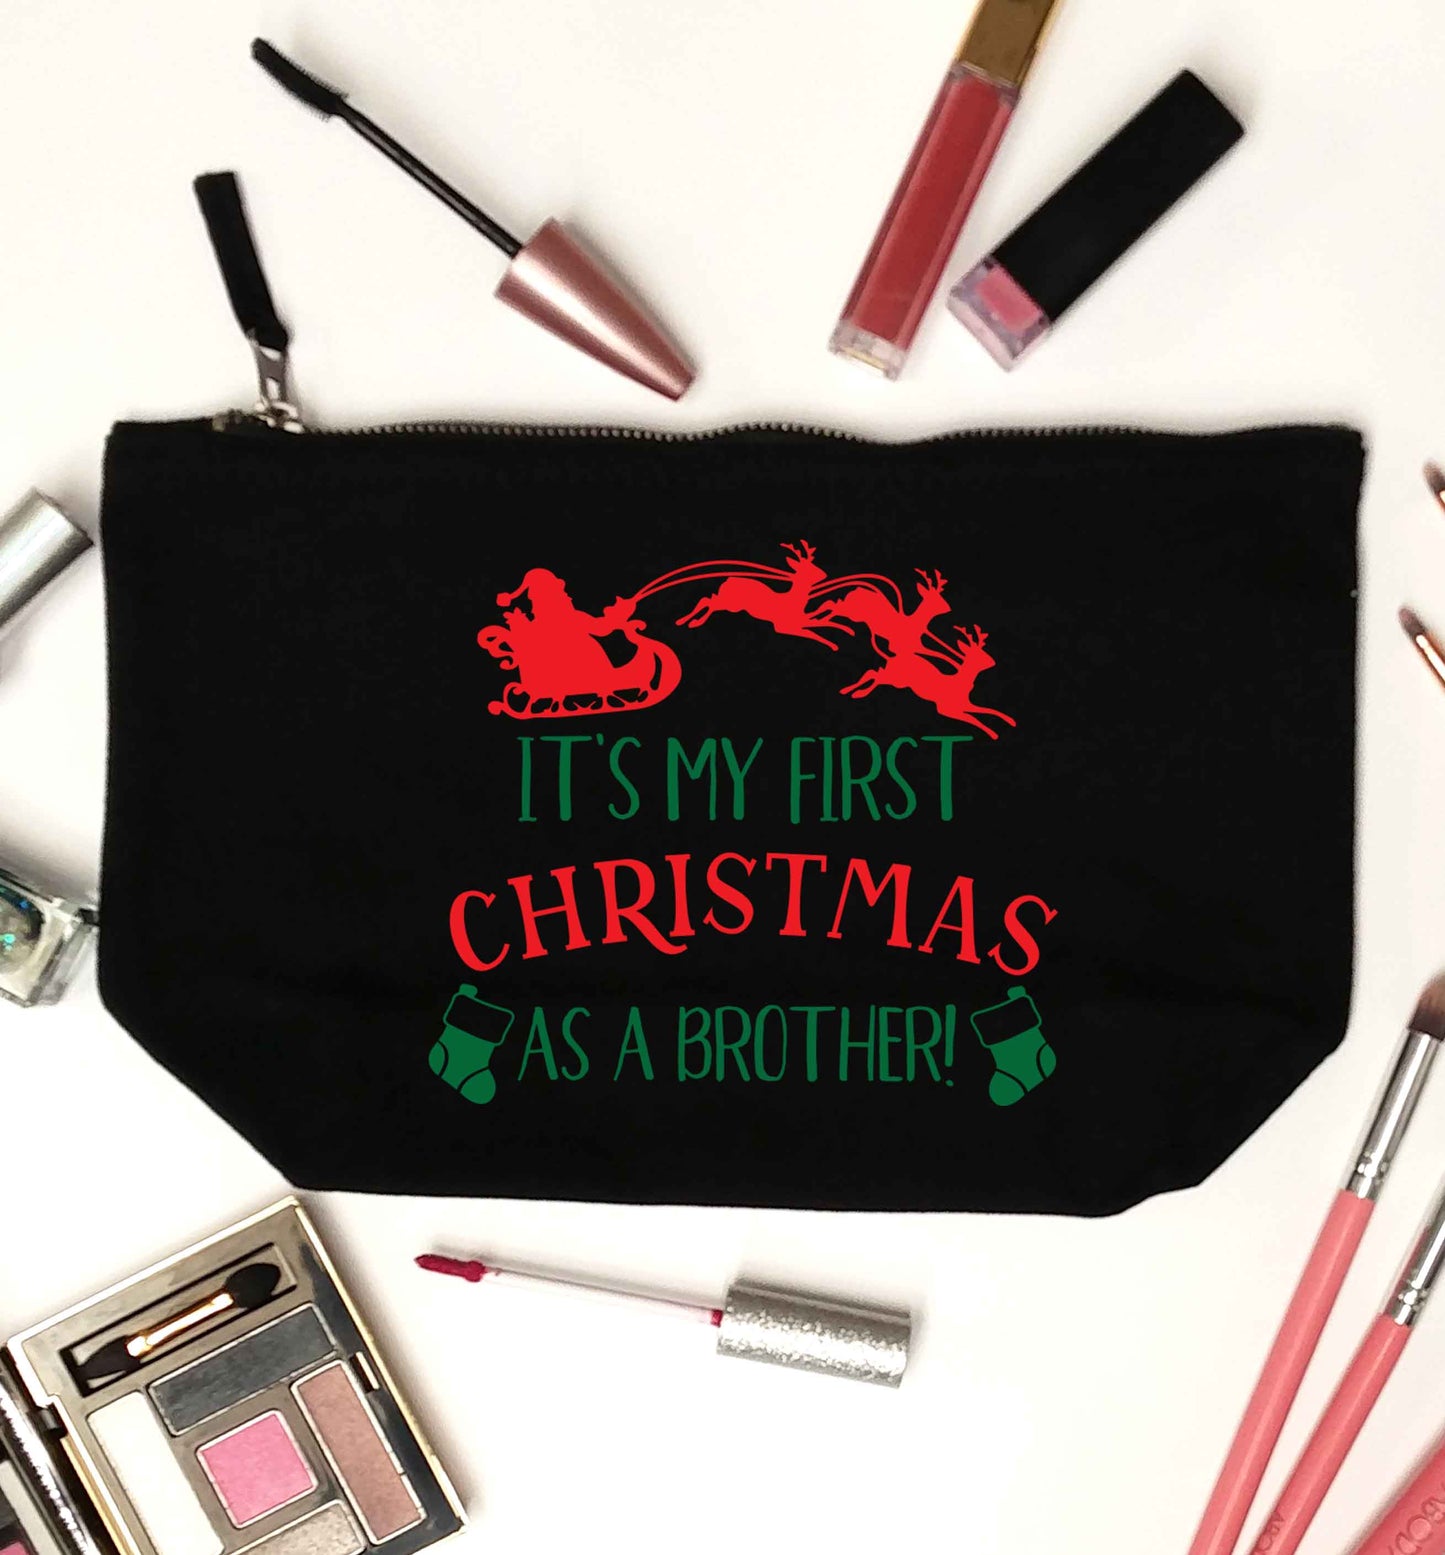 It's my first Christmas as a brother! black makeup bag